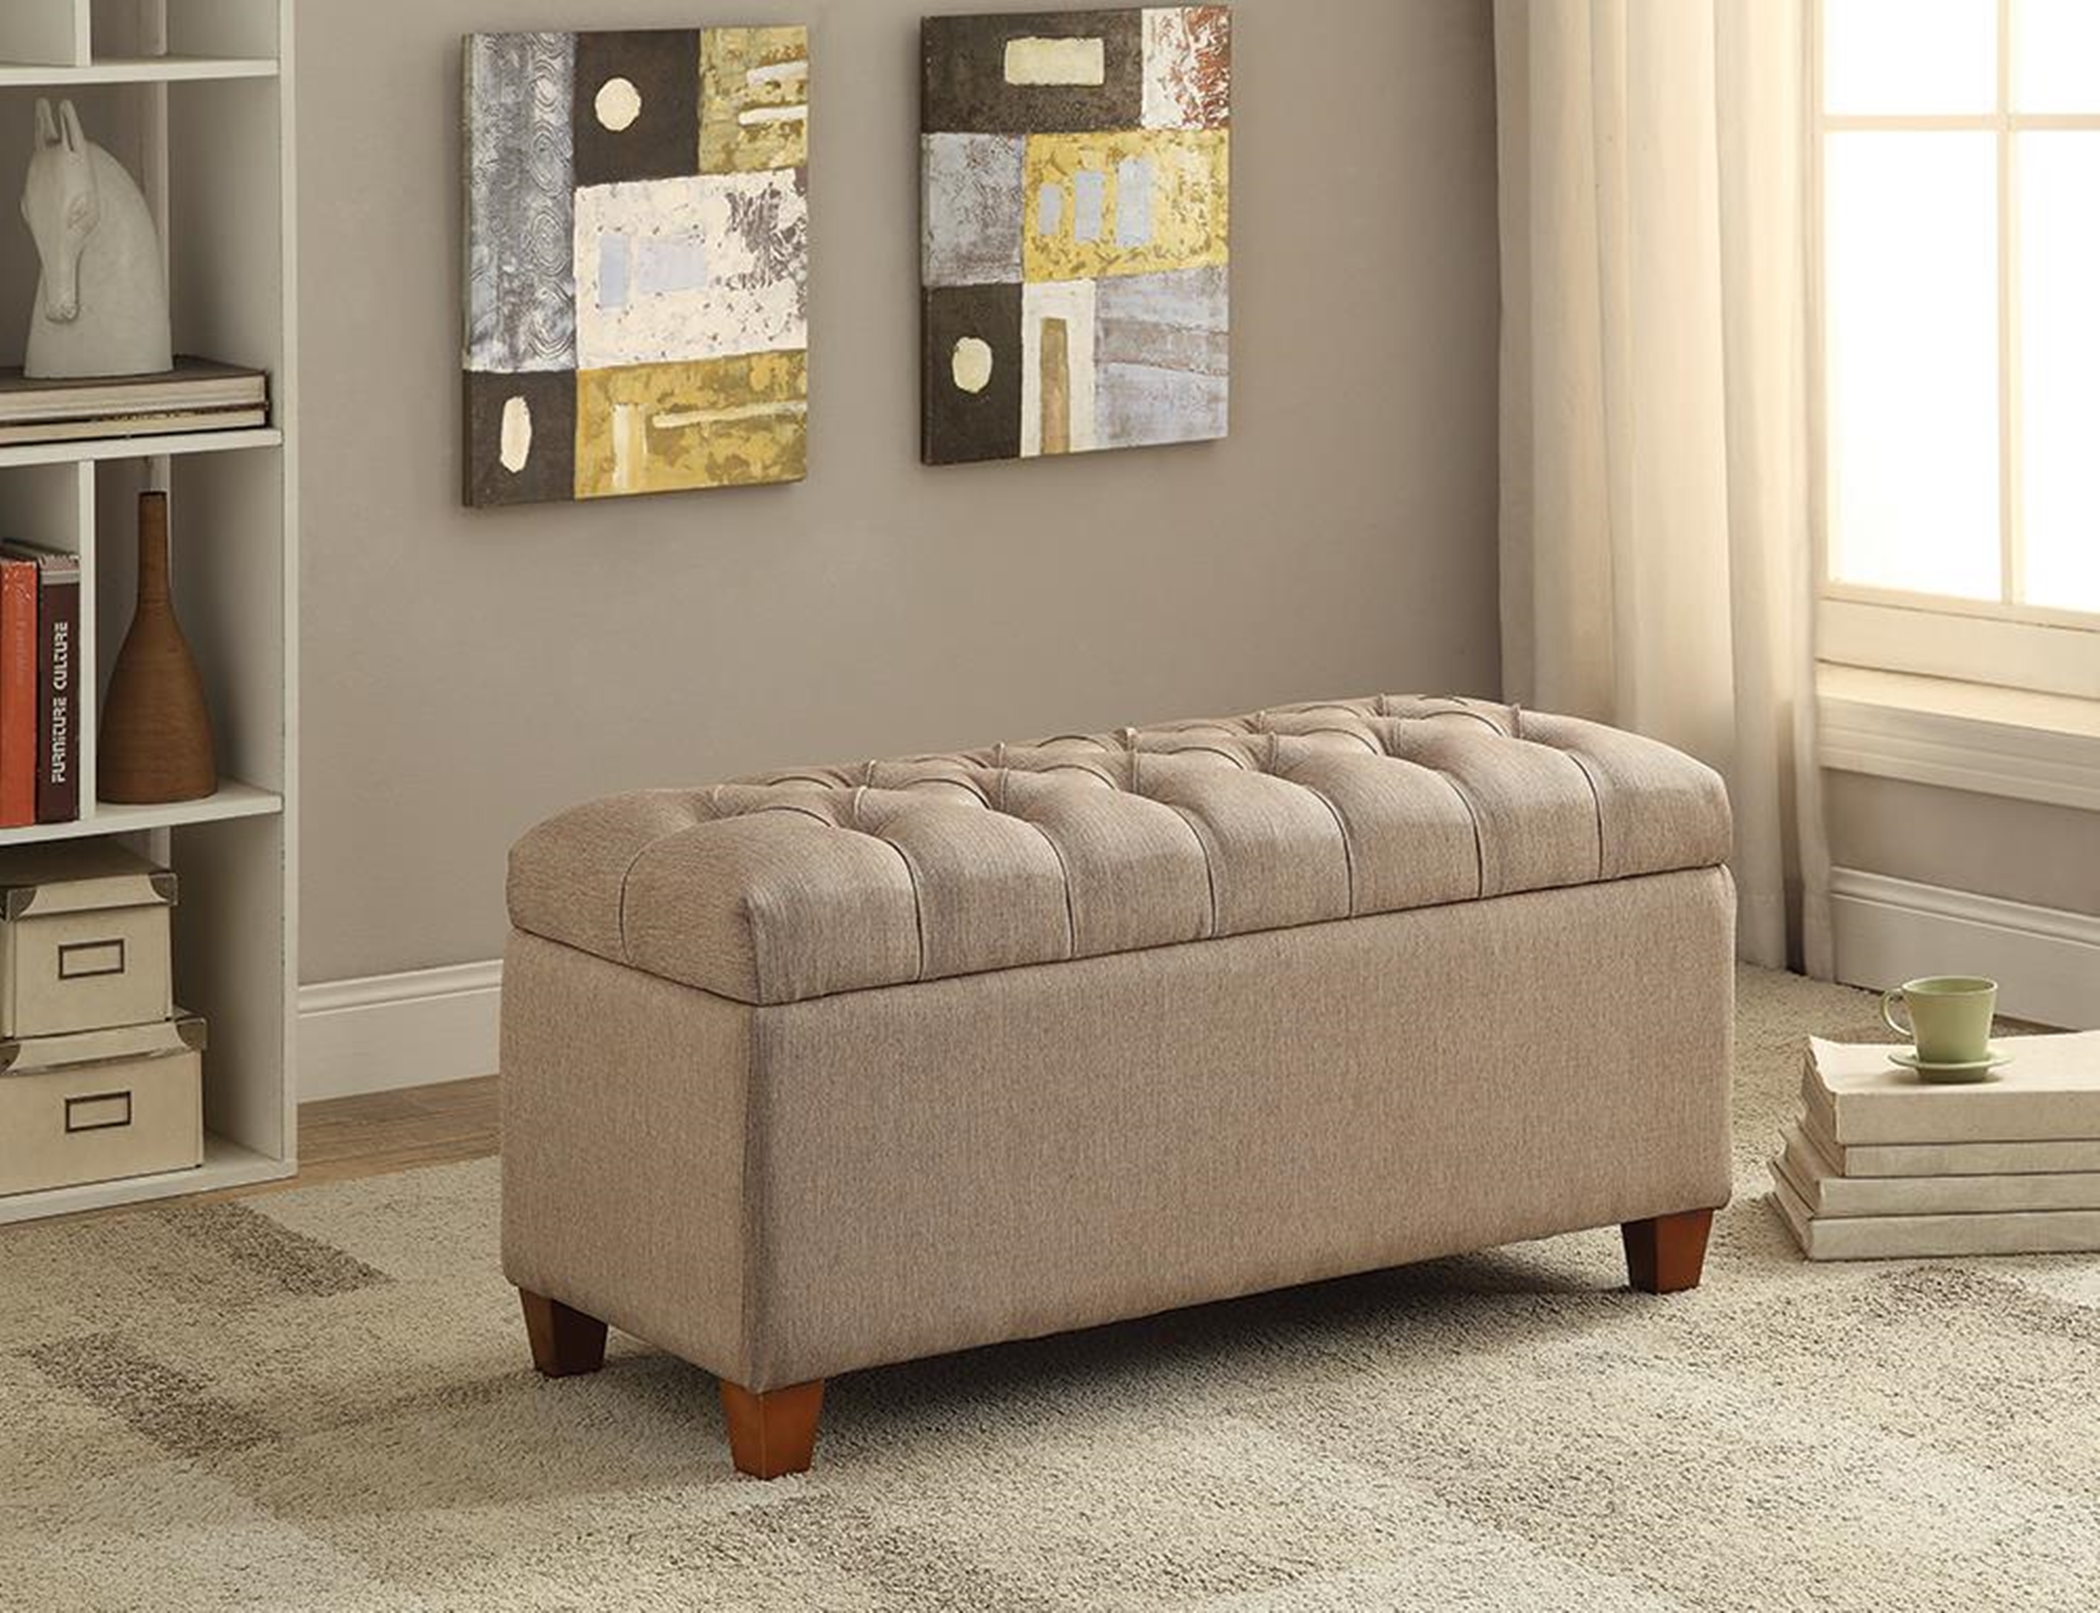 Tufted Taupe Storage Bench